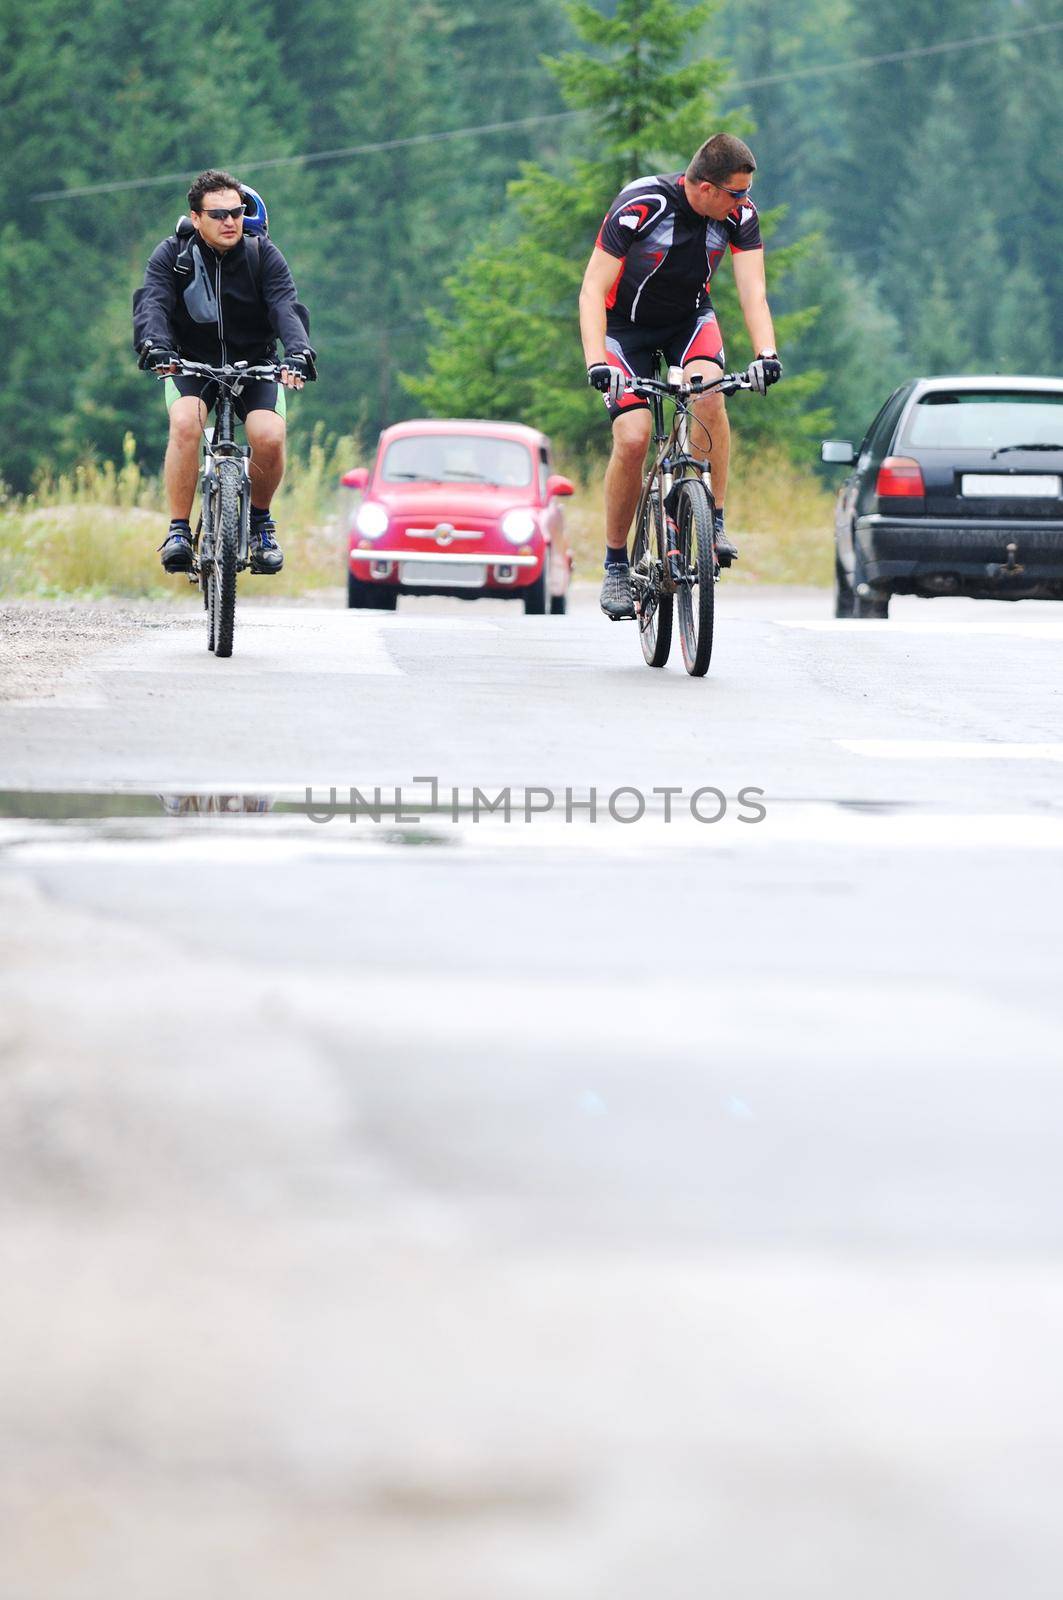 two friends have fun outdoor in nature and representing concept of  healthy life and fitnes on muntain bike 